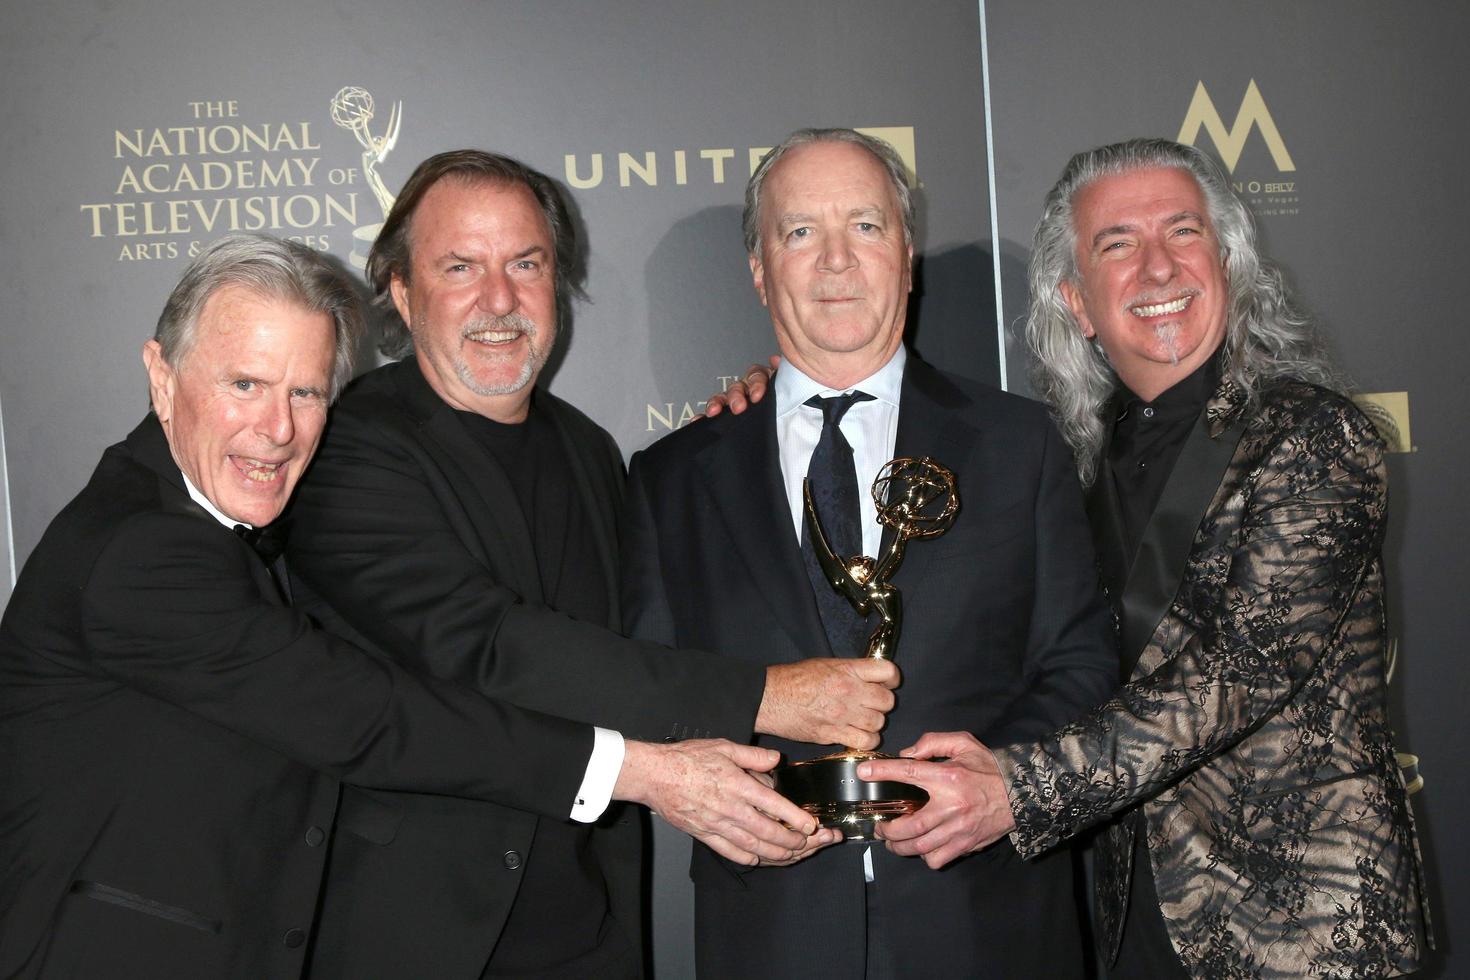 LOS ANGELES APR 29 - Ken Corday, Music Direction and Composition winners for Days of our Lives at the 2017 Creative Daytime Emmy Awards at the Pasadena Civic Auditorium on April 29, 2017 in Pasadena, CA photo